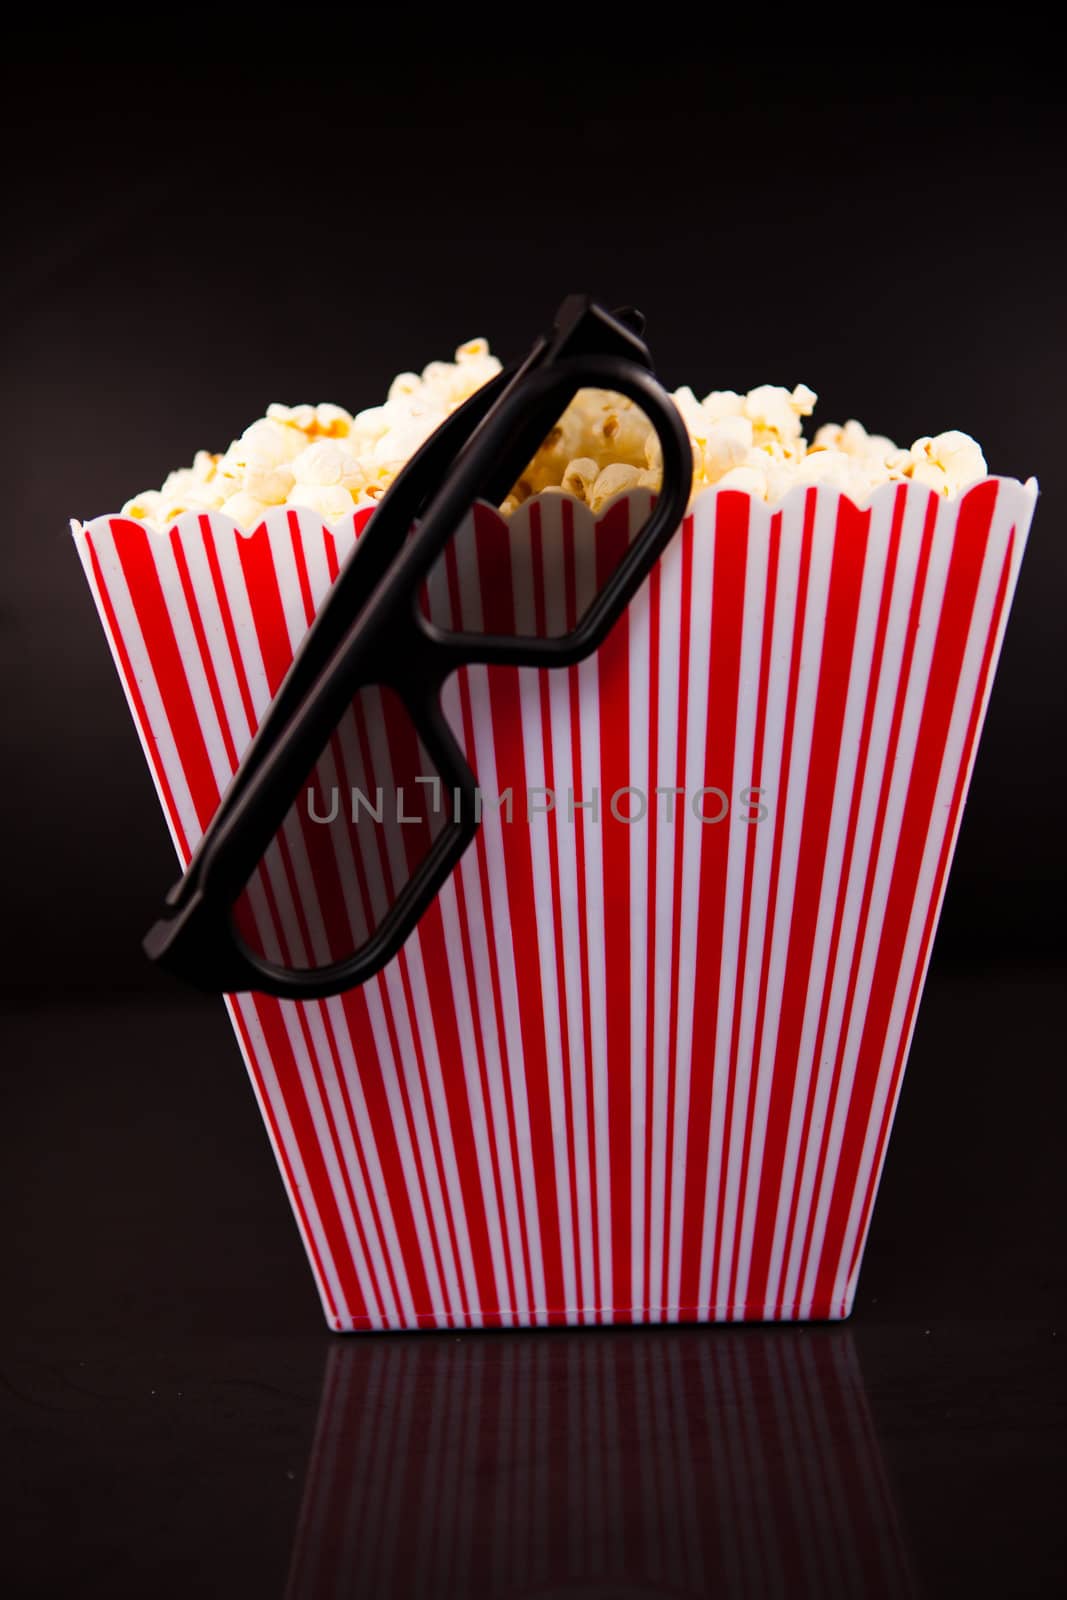 3D Glasses hanging on the edge of  a box full of pop corn by Wavebreakmedia